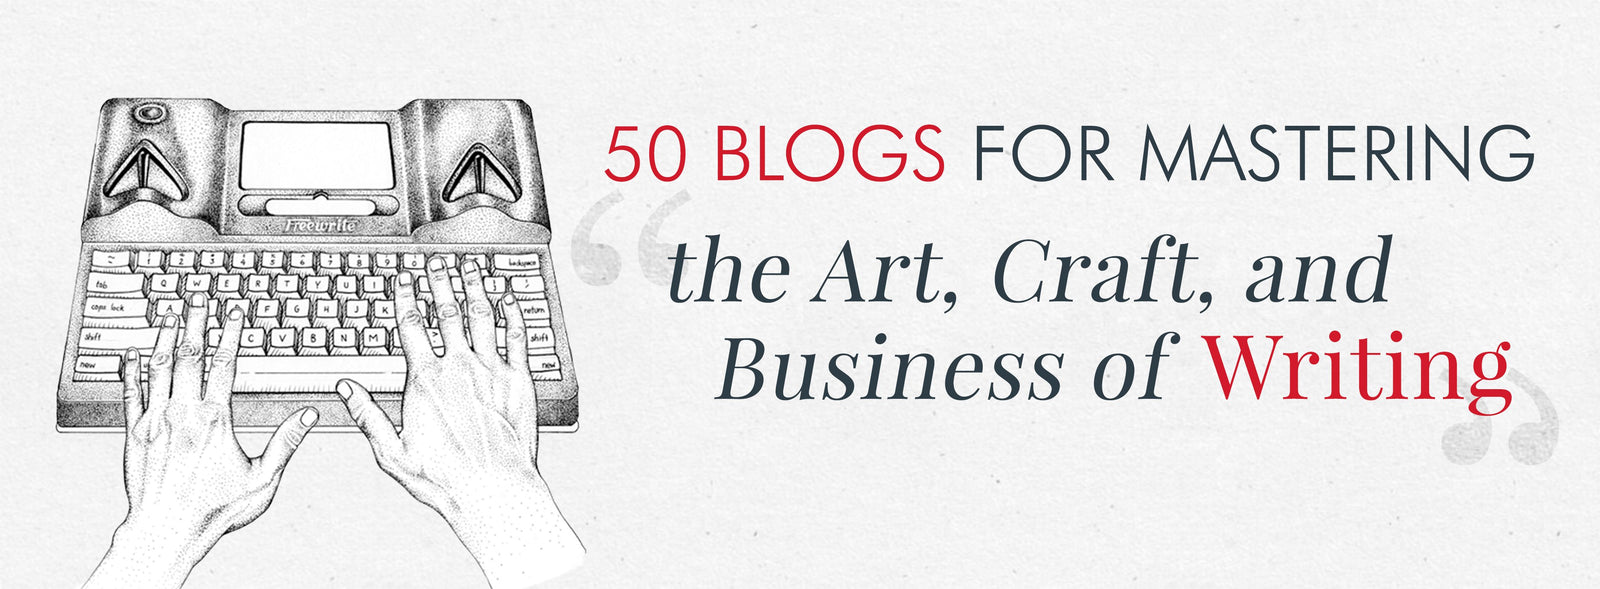 50 Blogs for Mastering the Art, Craft, and Business of Writing